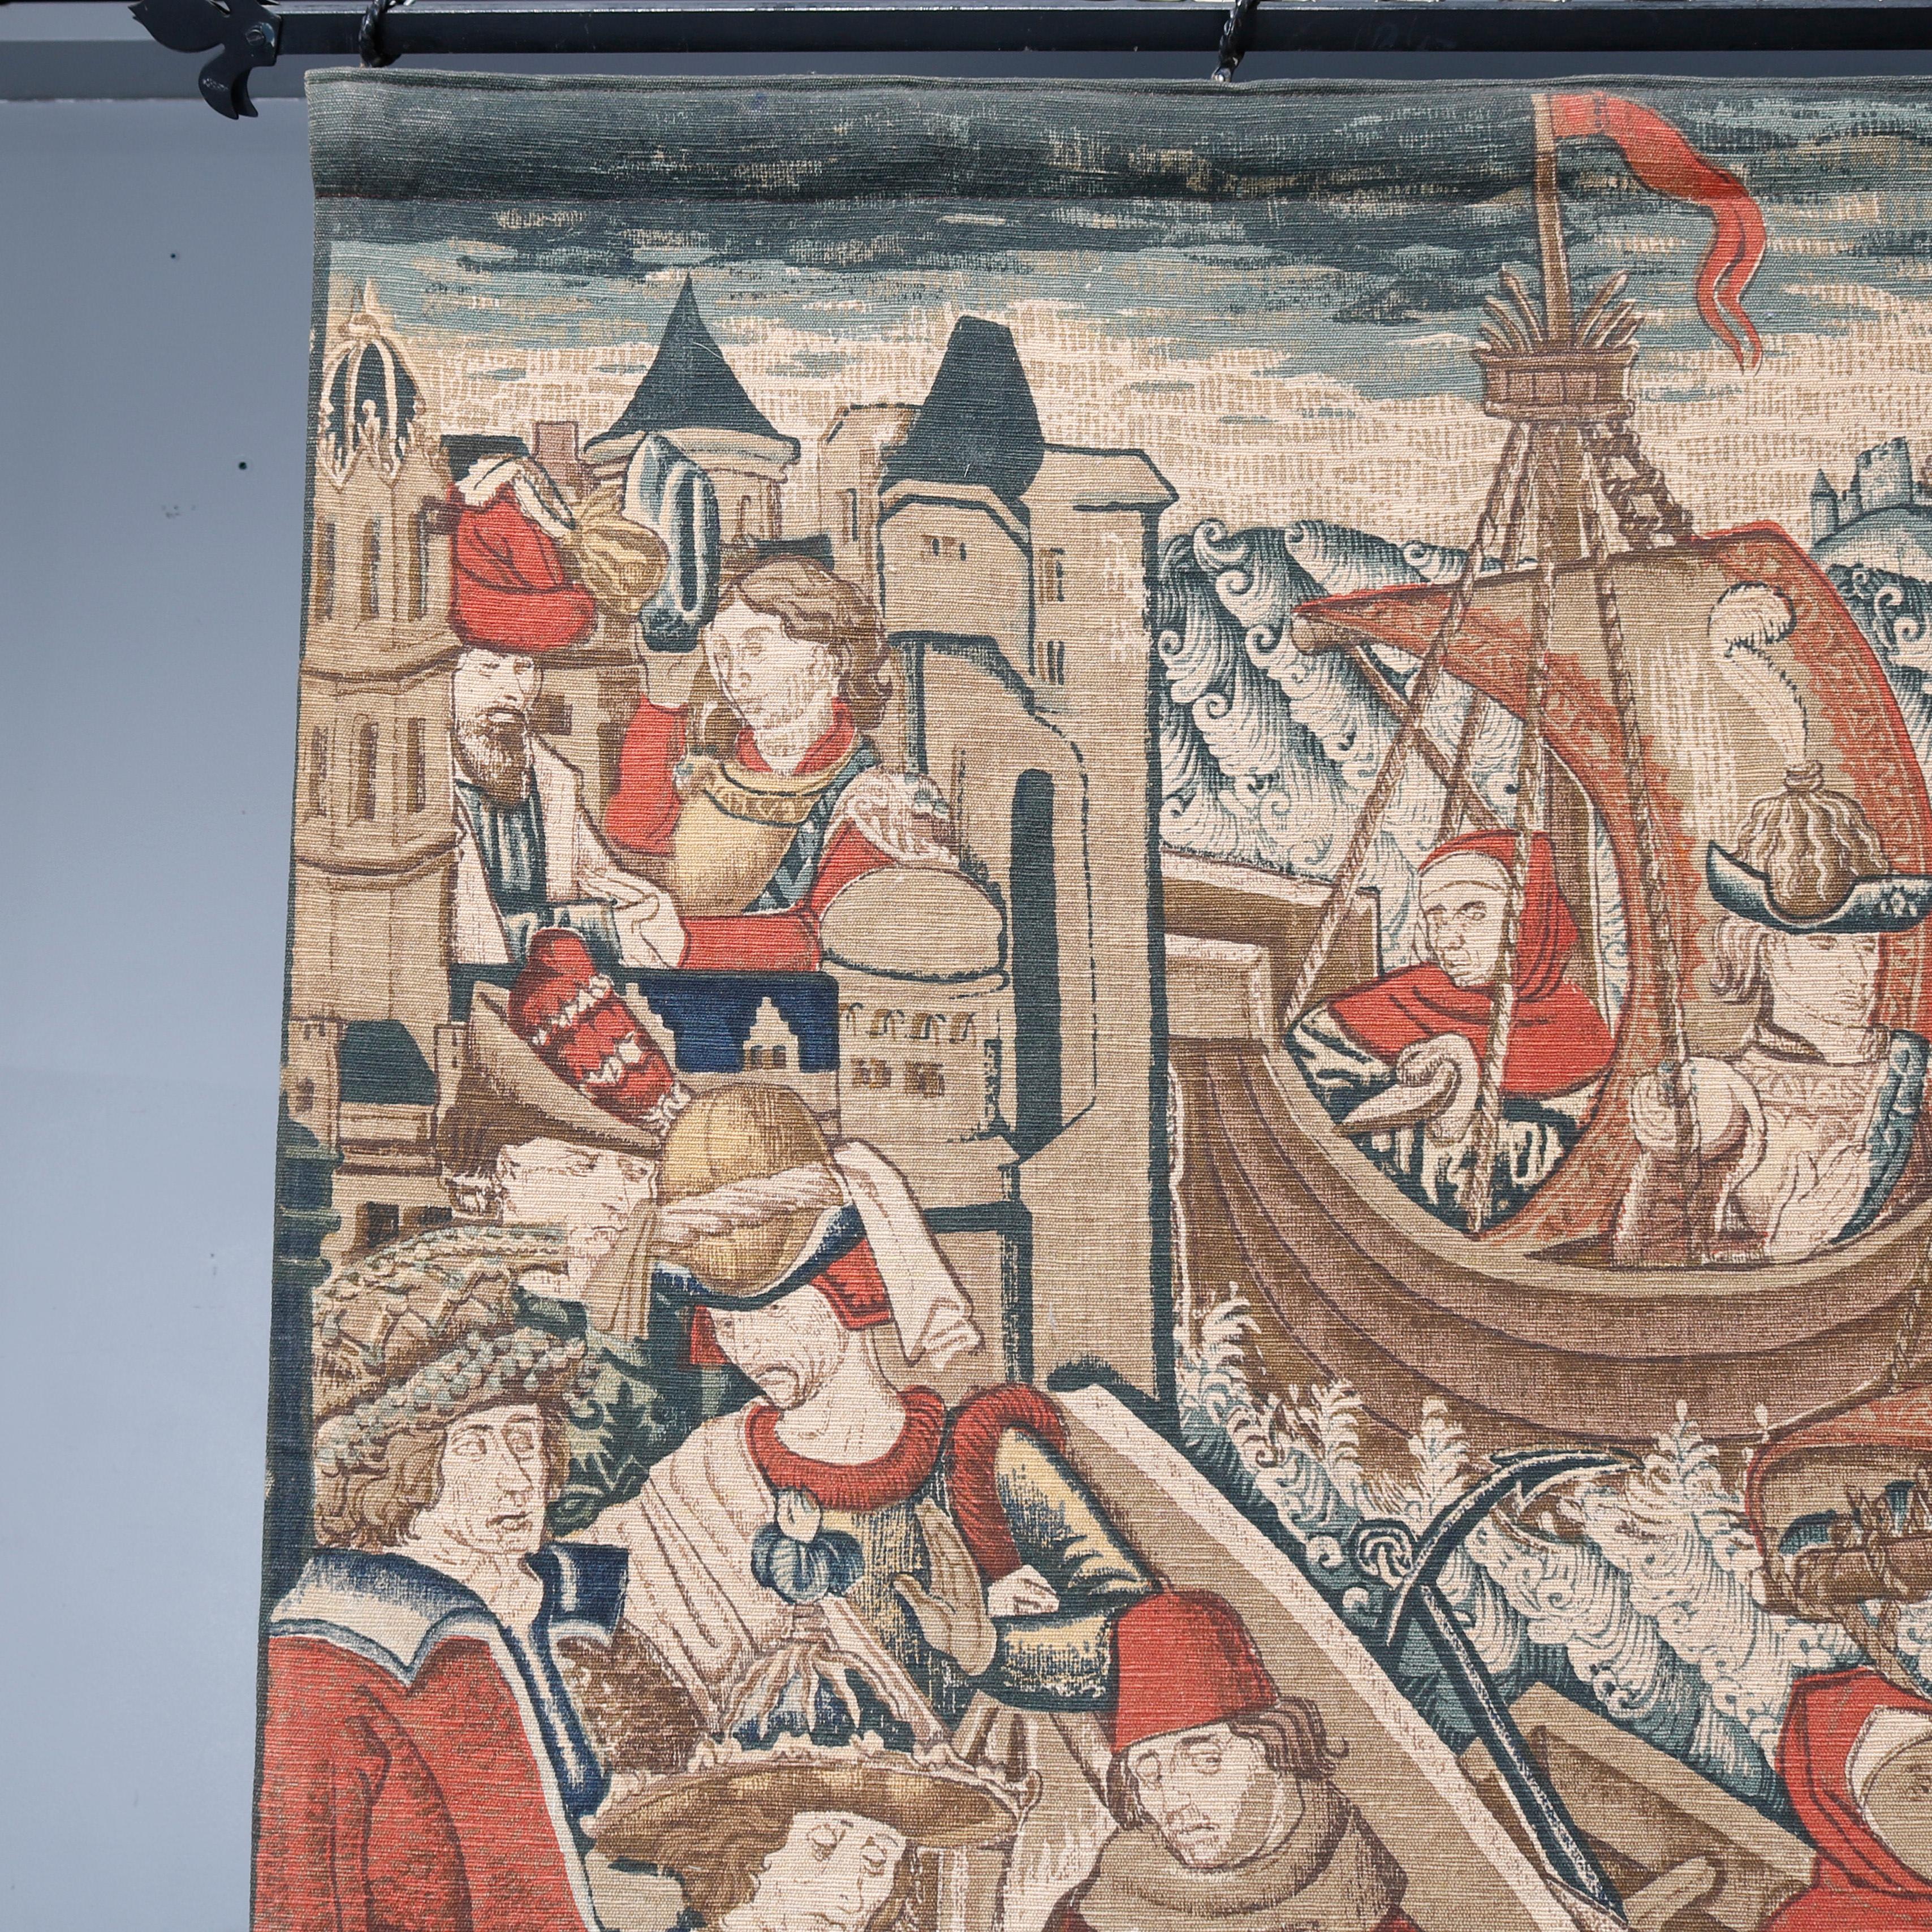 A vintage Belgium Flemish style wall tapestry offers Medieval scene with figures, structures including castles, and ships, back is lined as photographed, 20th century

Measures: 80.25